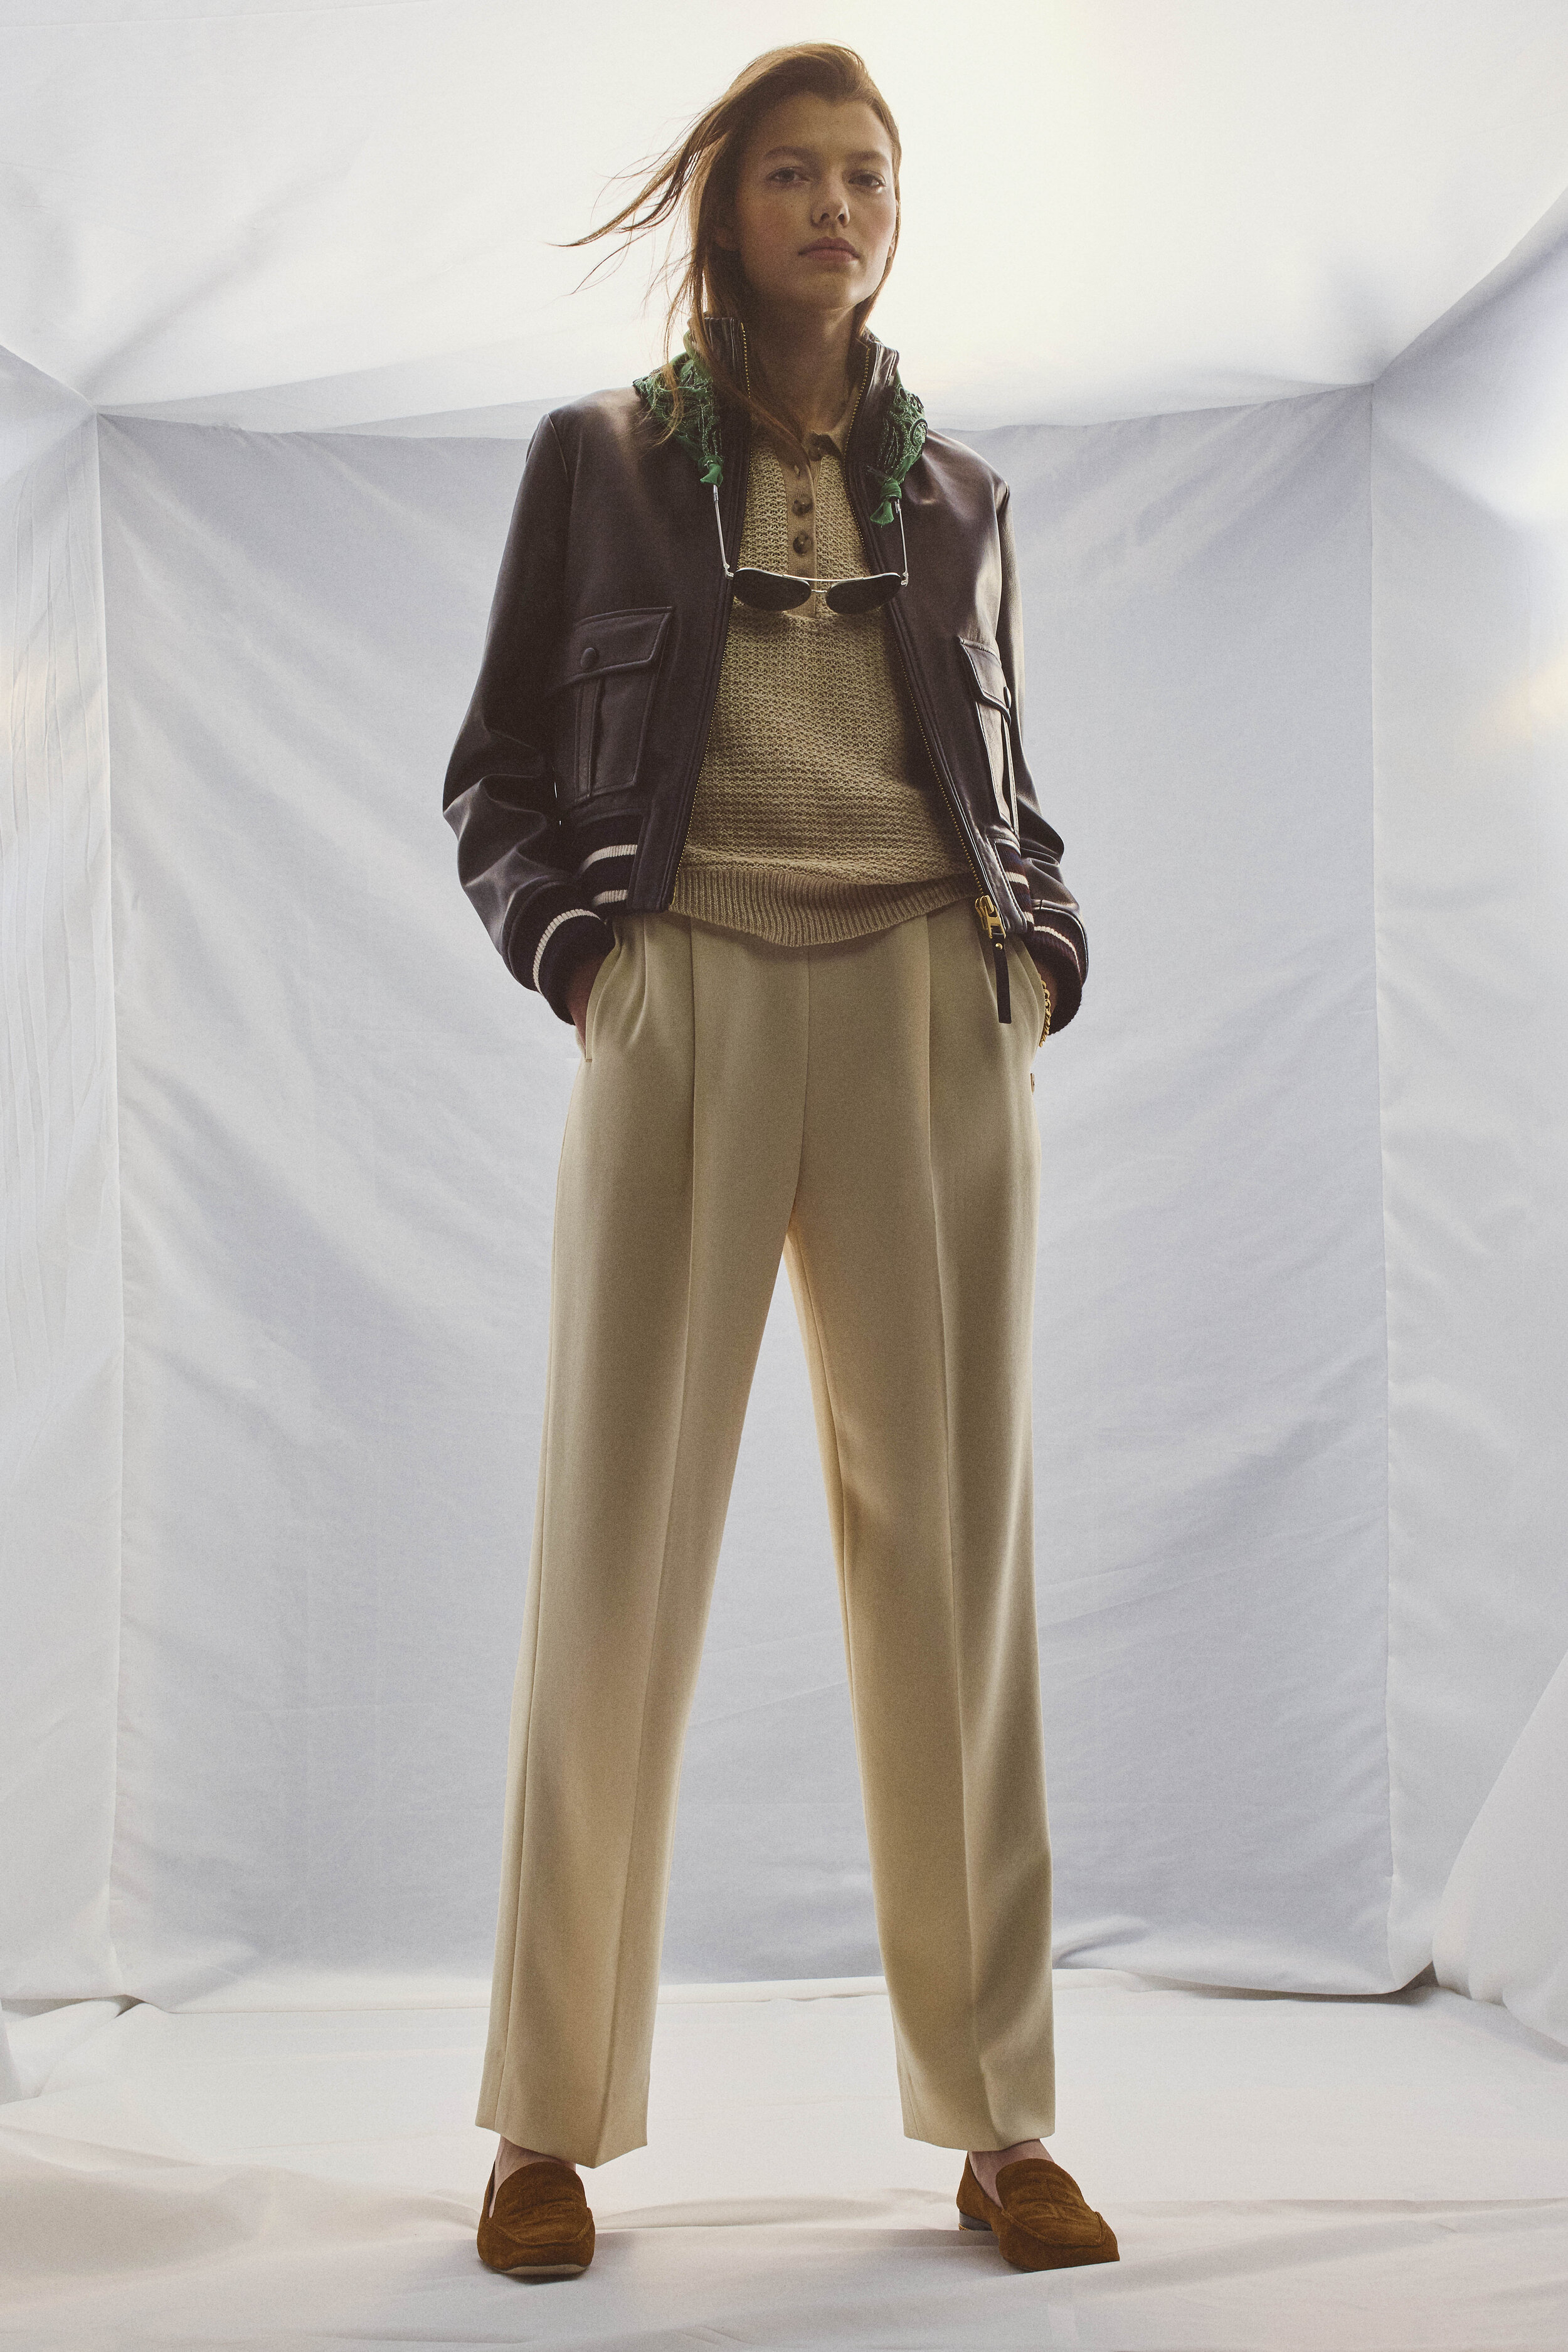 Tory Burch Collection Notes: Pre Fall 2020 — SSI Life